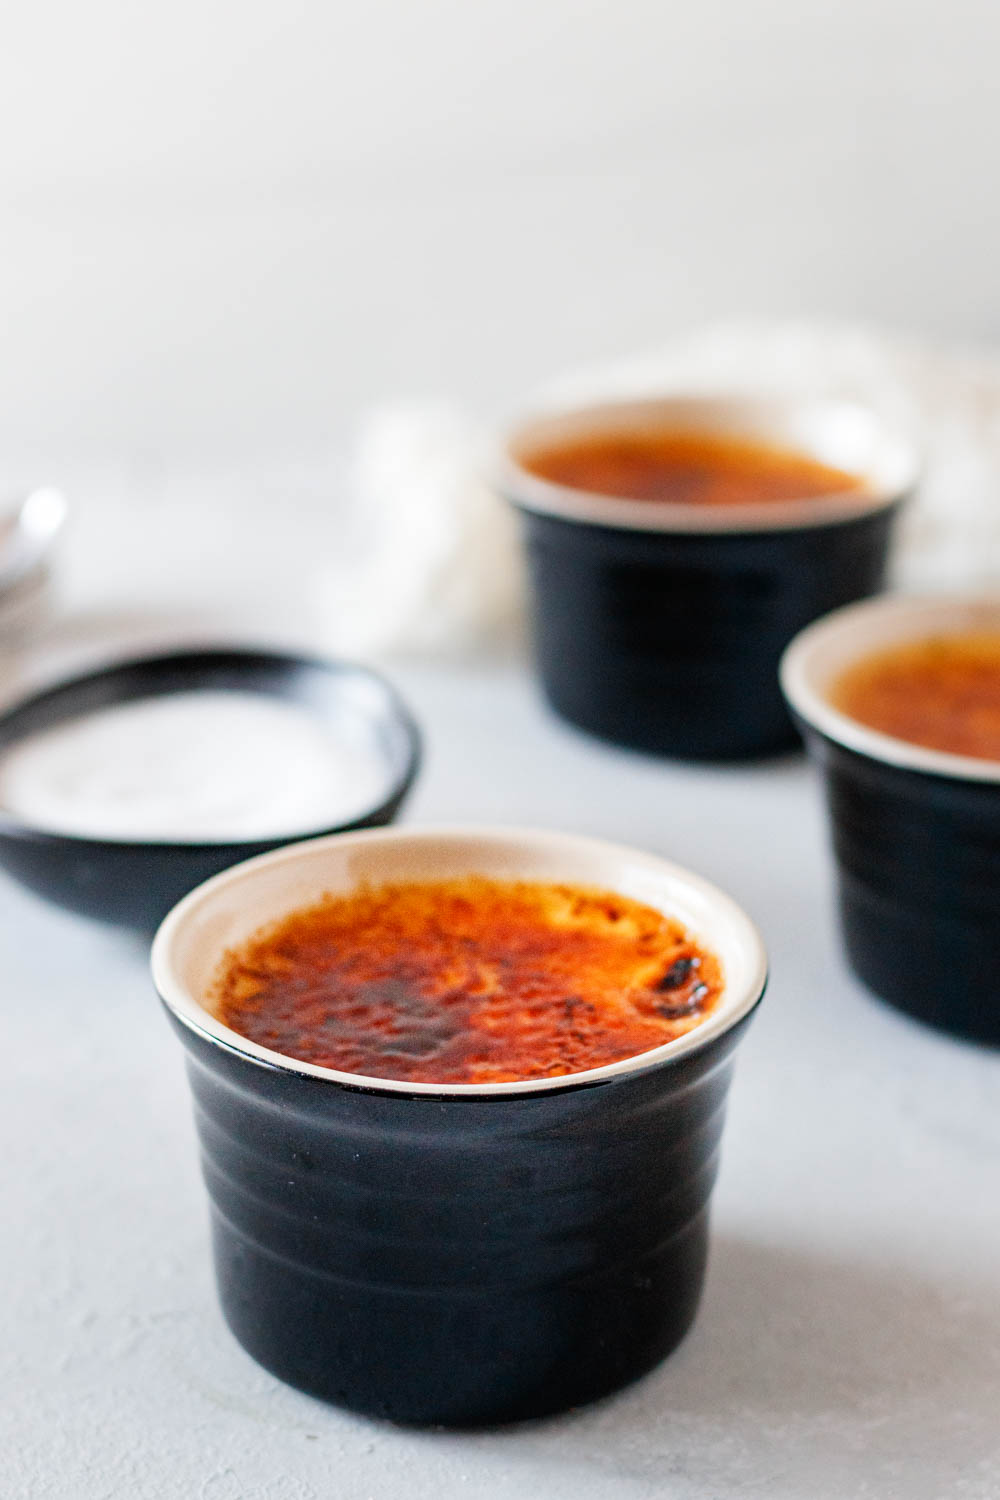 Image of 3 individual servings of Irish Cream Creme Brulee in black ramekins on a light surface with a light background. A bowl of granulated sugar for topping and creating the burnt sugar crust can be seen on the left side of the image. 